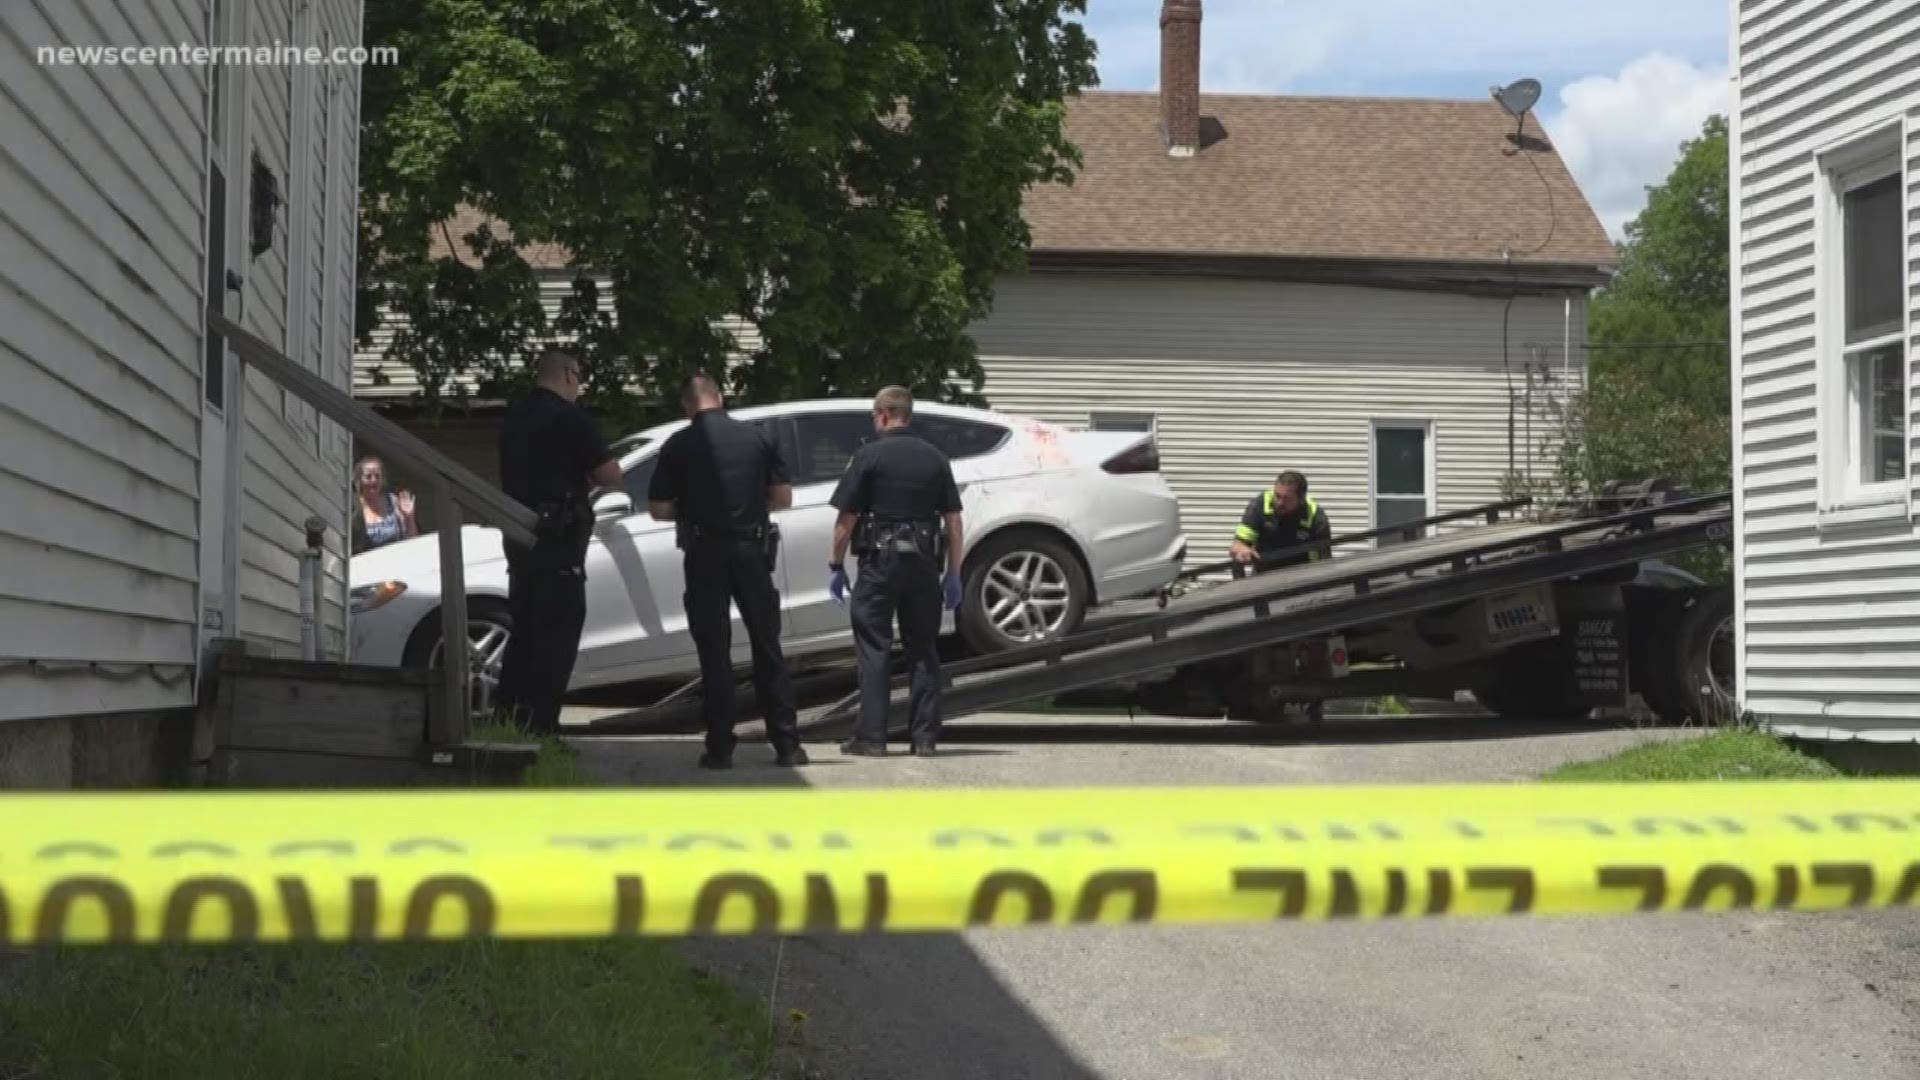 No one has been charged or is in custody yet after a double shooting in Bangor on Tuesday.